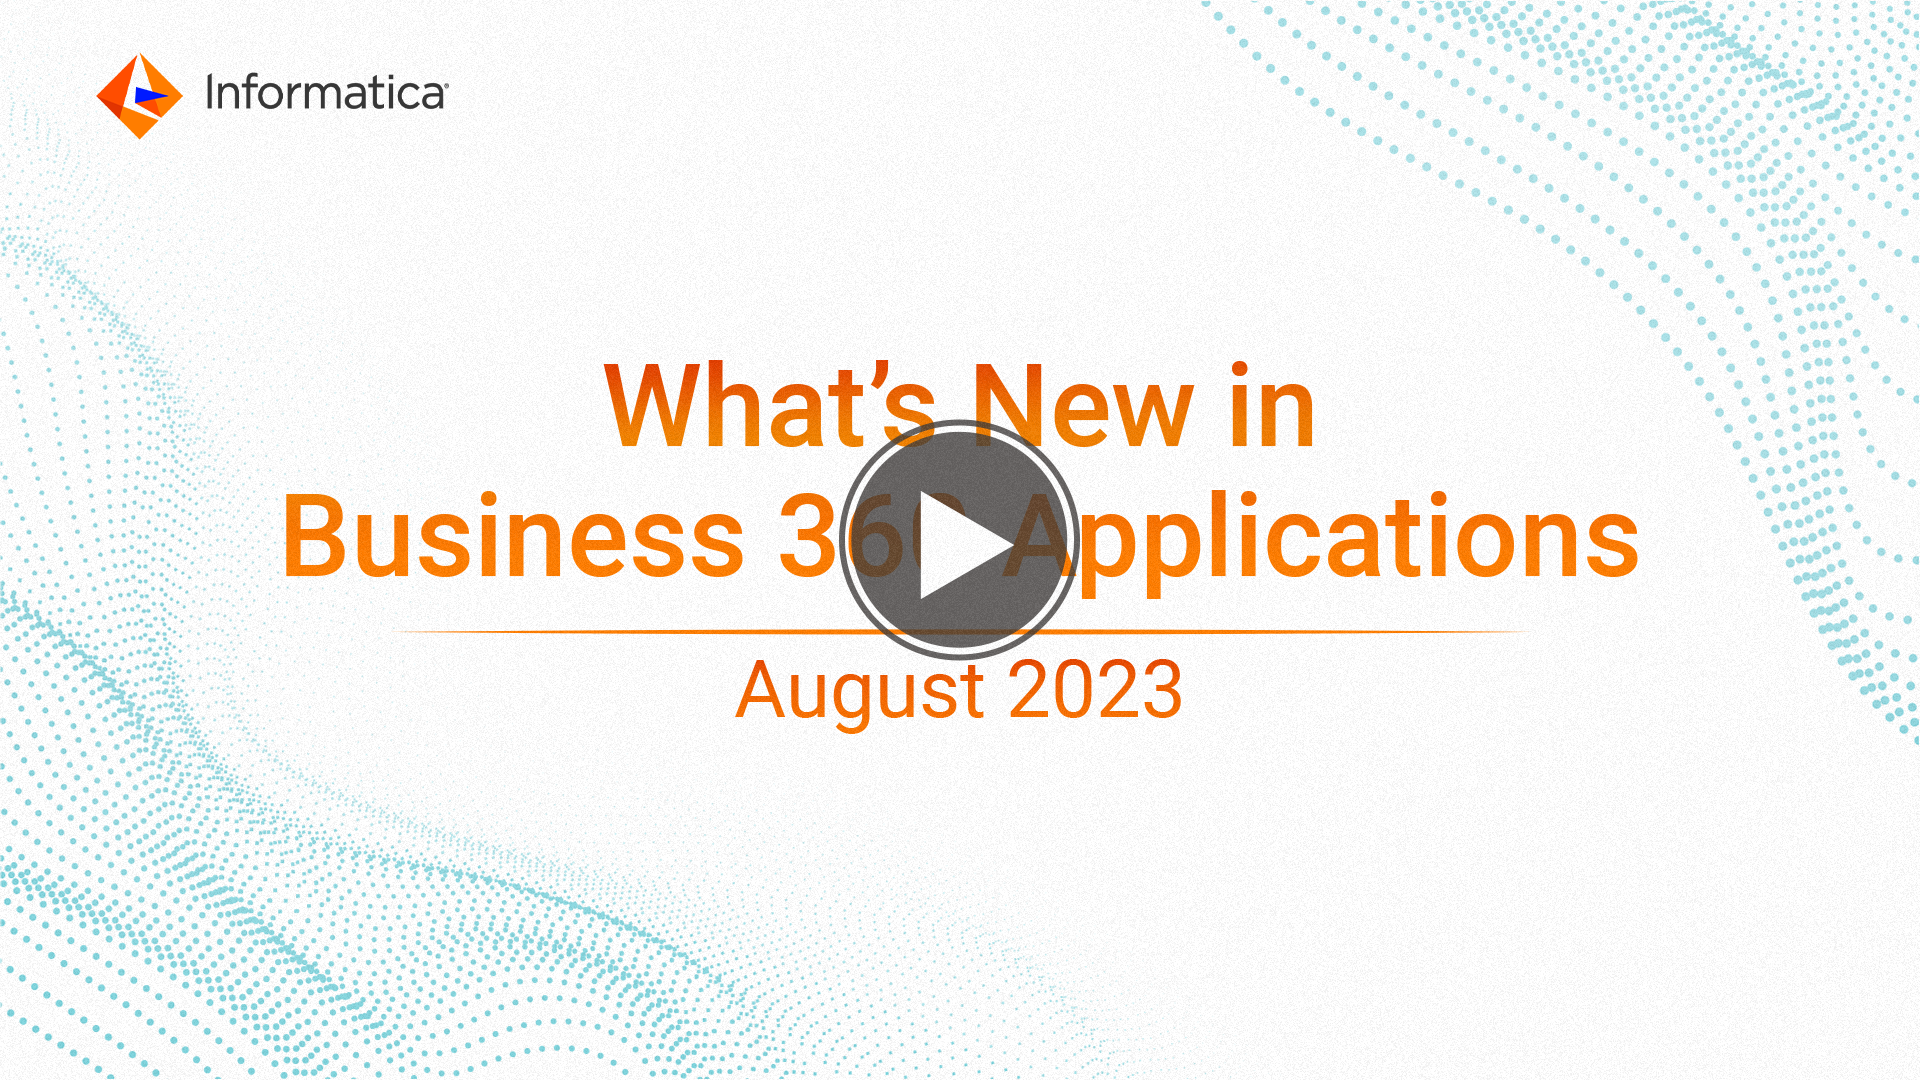 Business 360 Applications What's New video for August 2023 release.